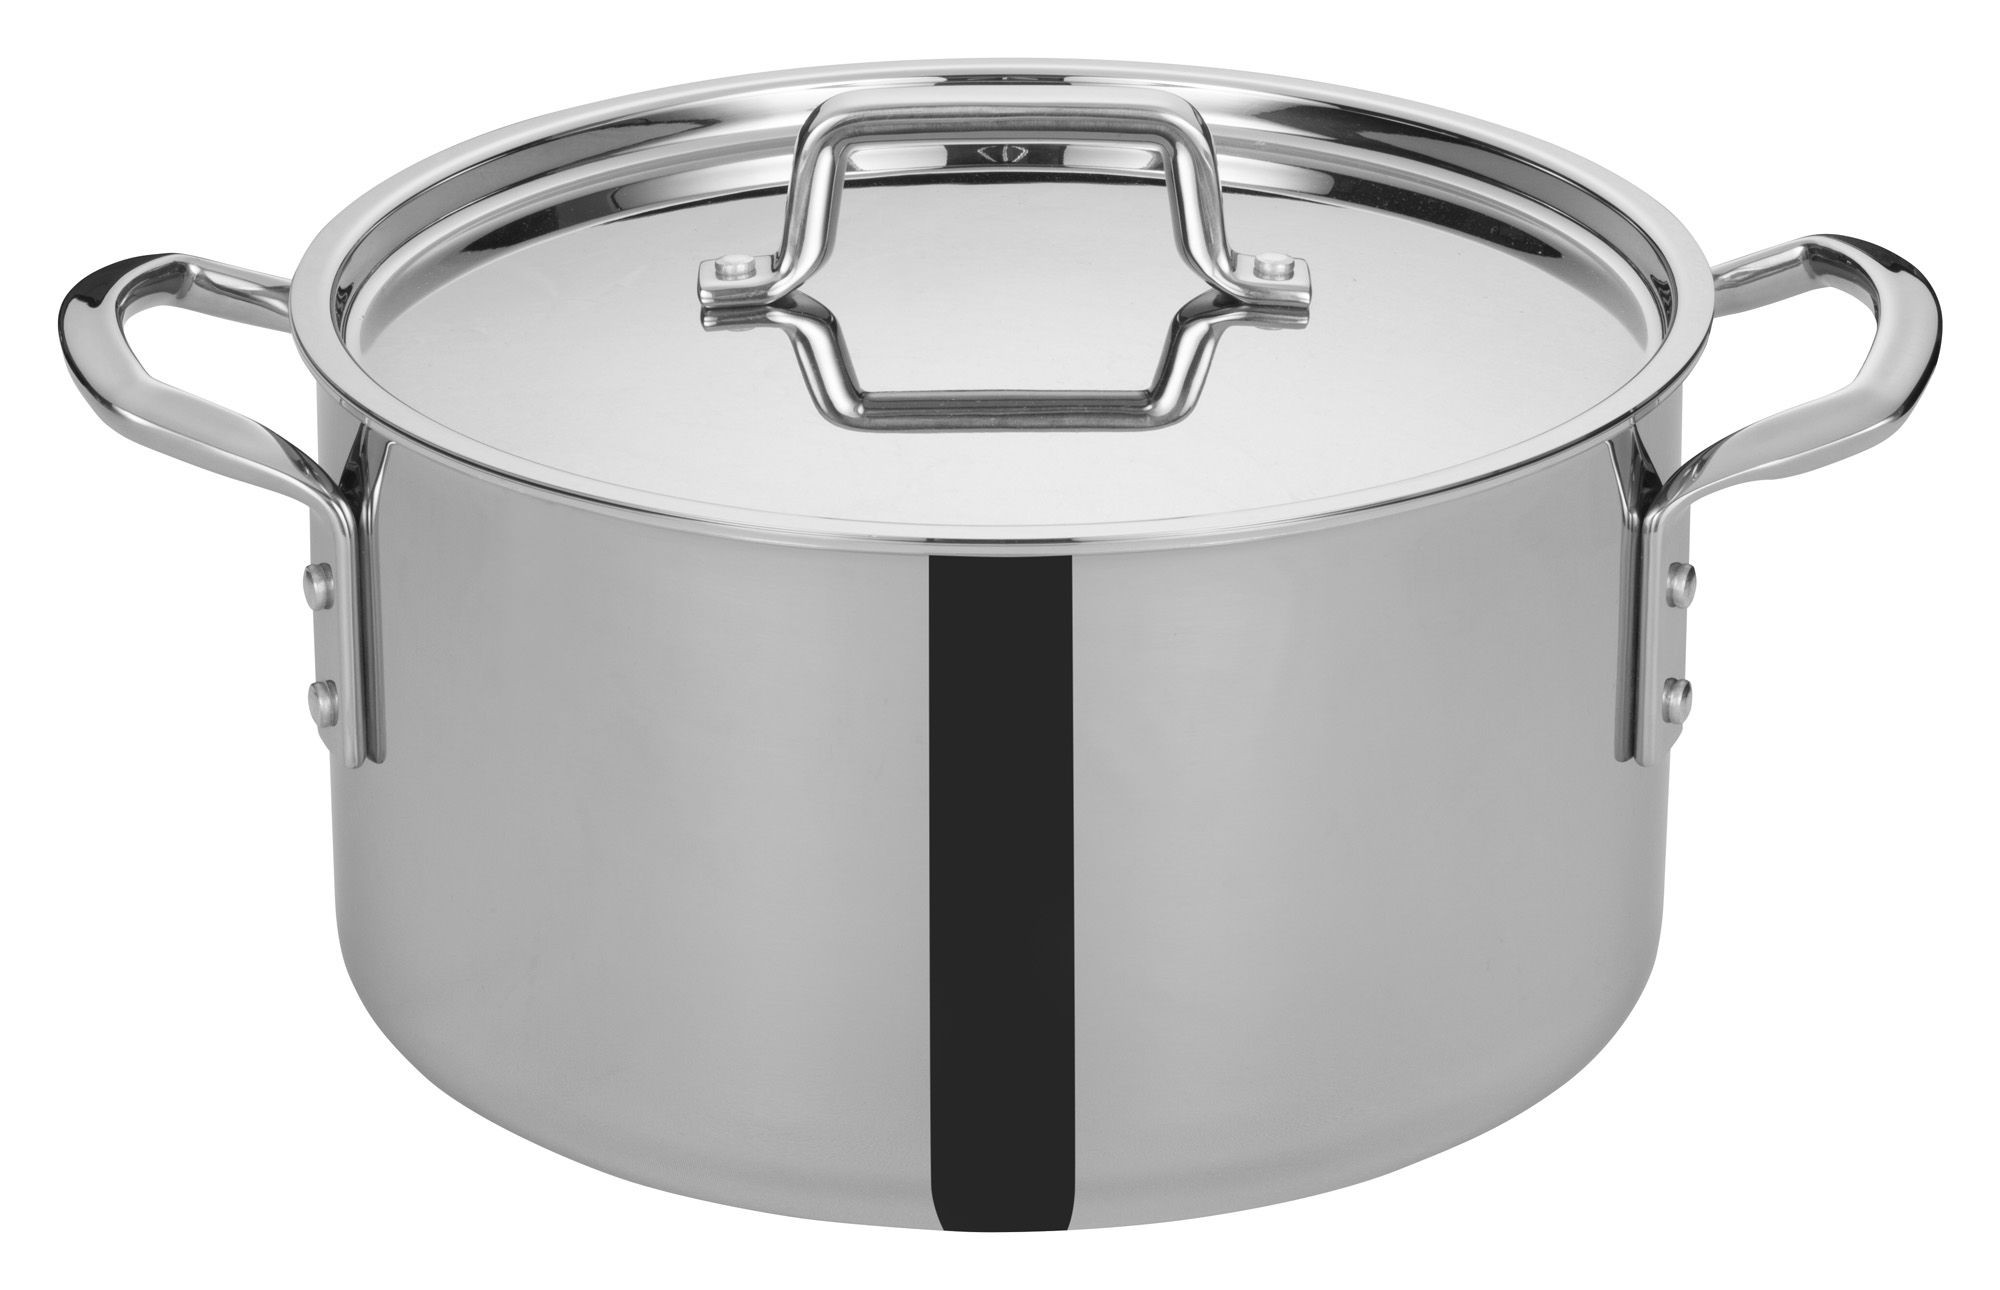 https://www.lionsdeal.com/itempics/Winco-TGSP-12-Tri-Ply-Stainless-Steel-12-Qt--Stock-Pot-with-Cover-38446_xlarge.jpg